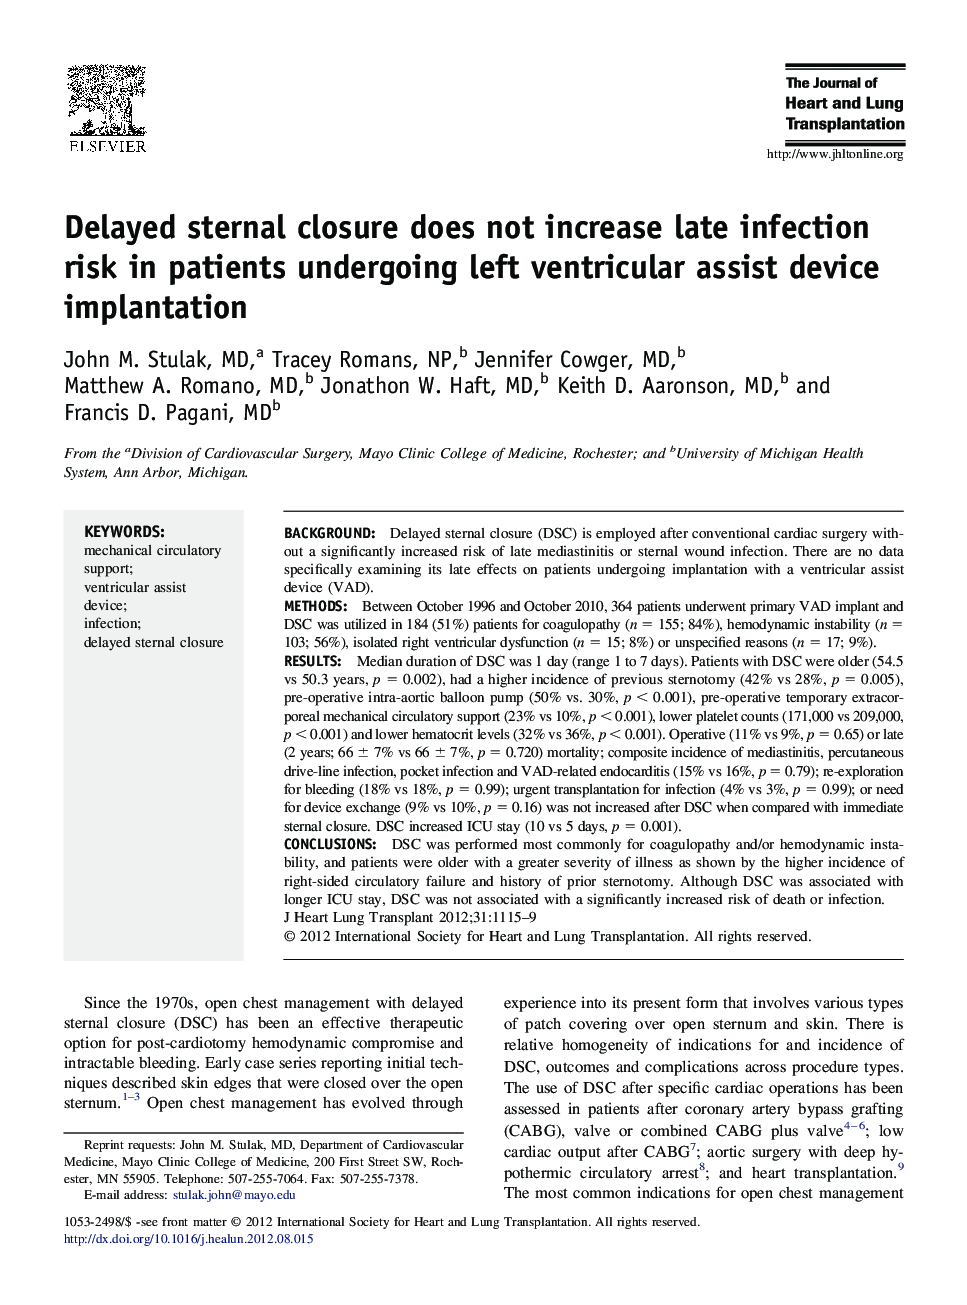 Delayed sternal closure does not increase late infection risk in patients undergoing left ventricular assist device implantation